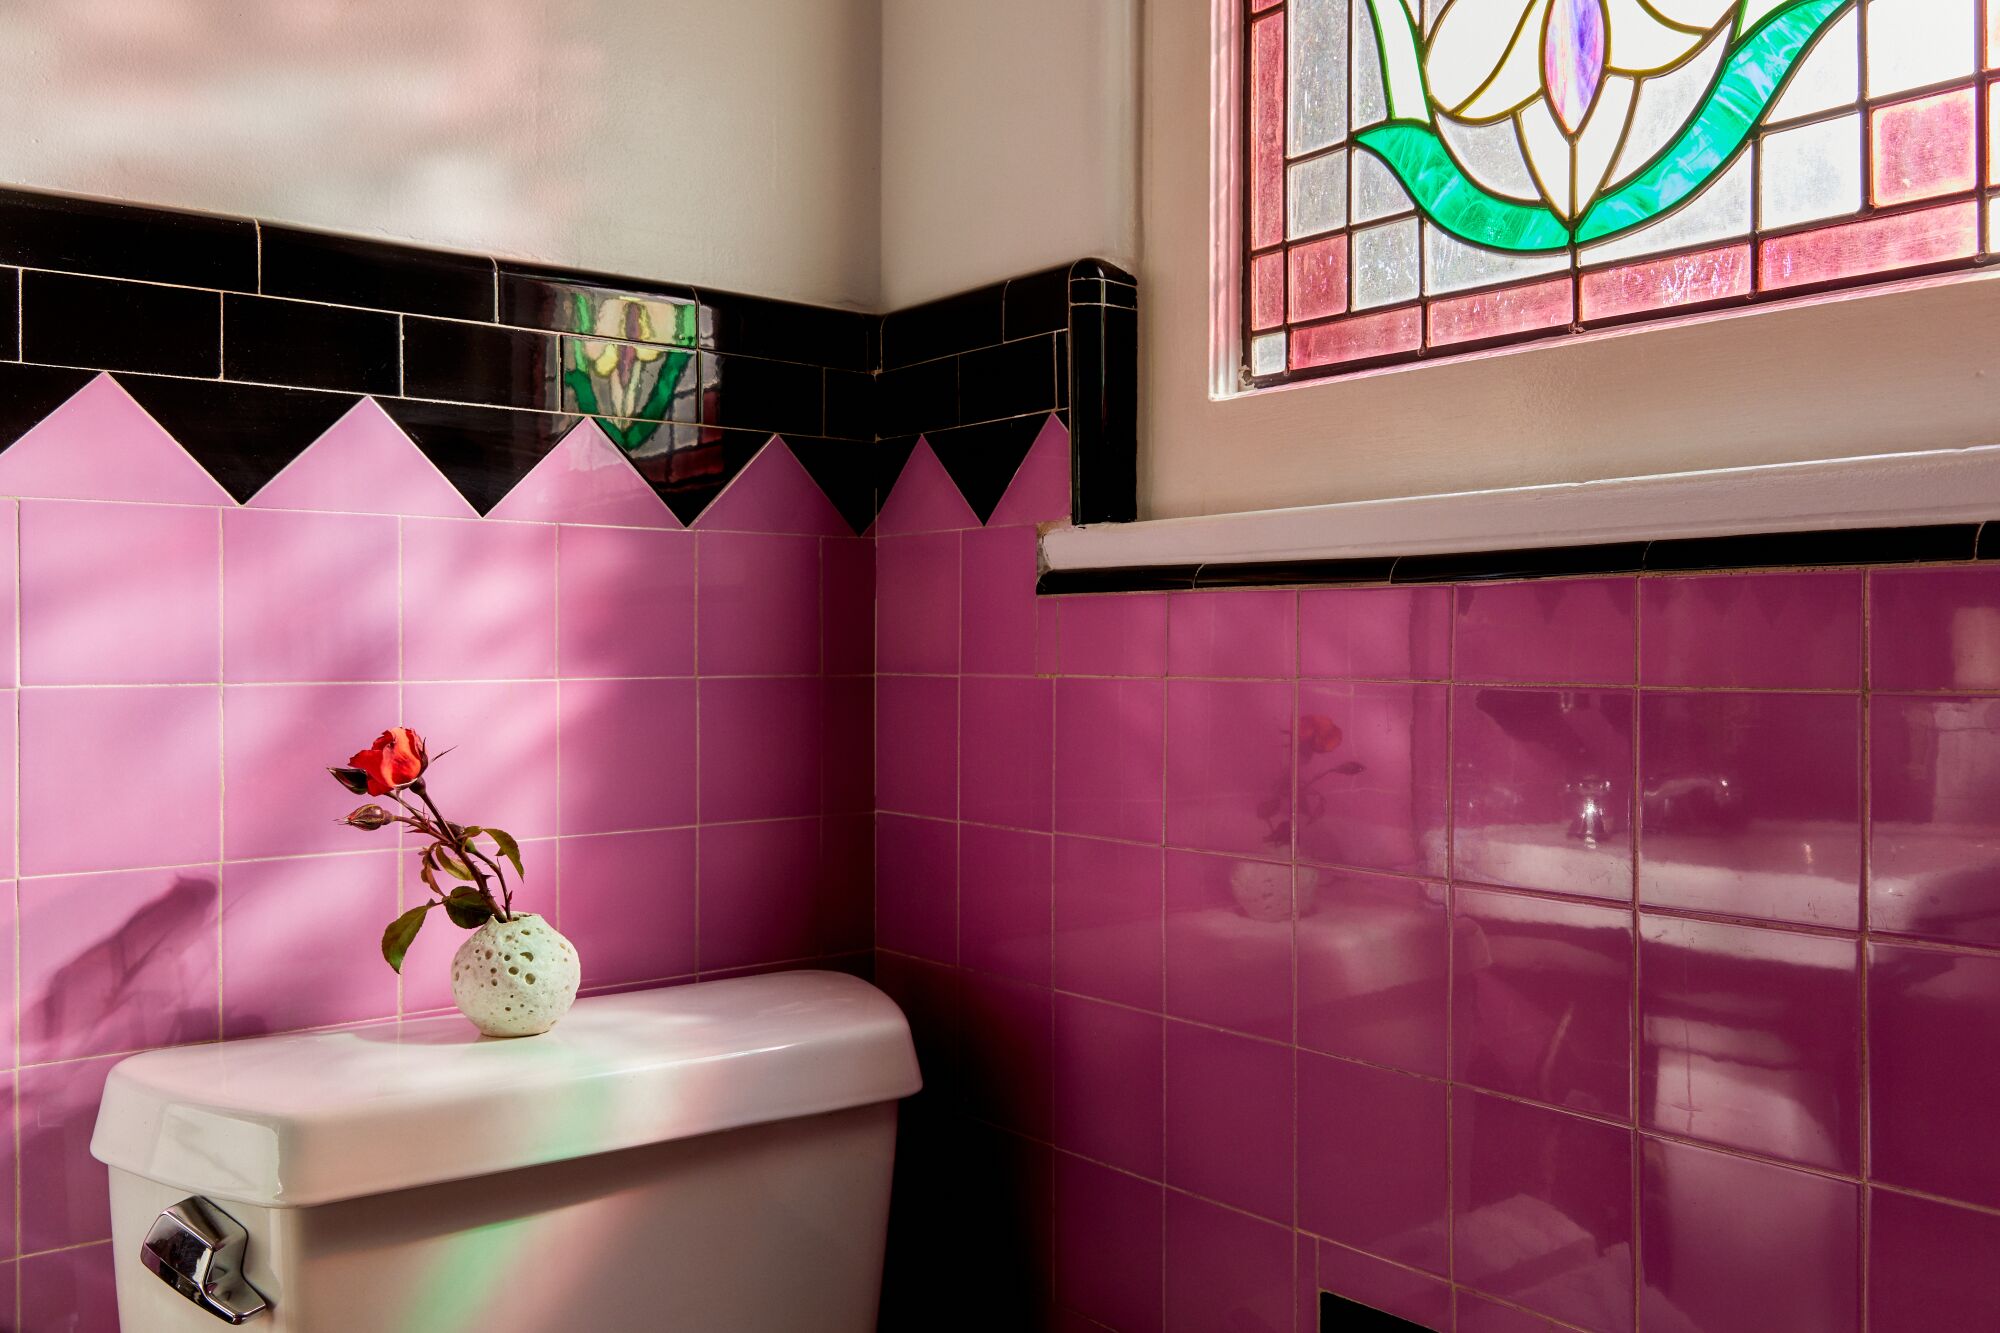 A bathroom with pink tile and a black, sawtooth border. On the toilet tank: a red rose in a bud vase. 